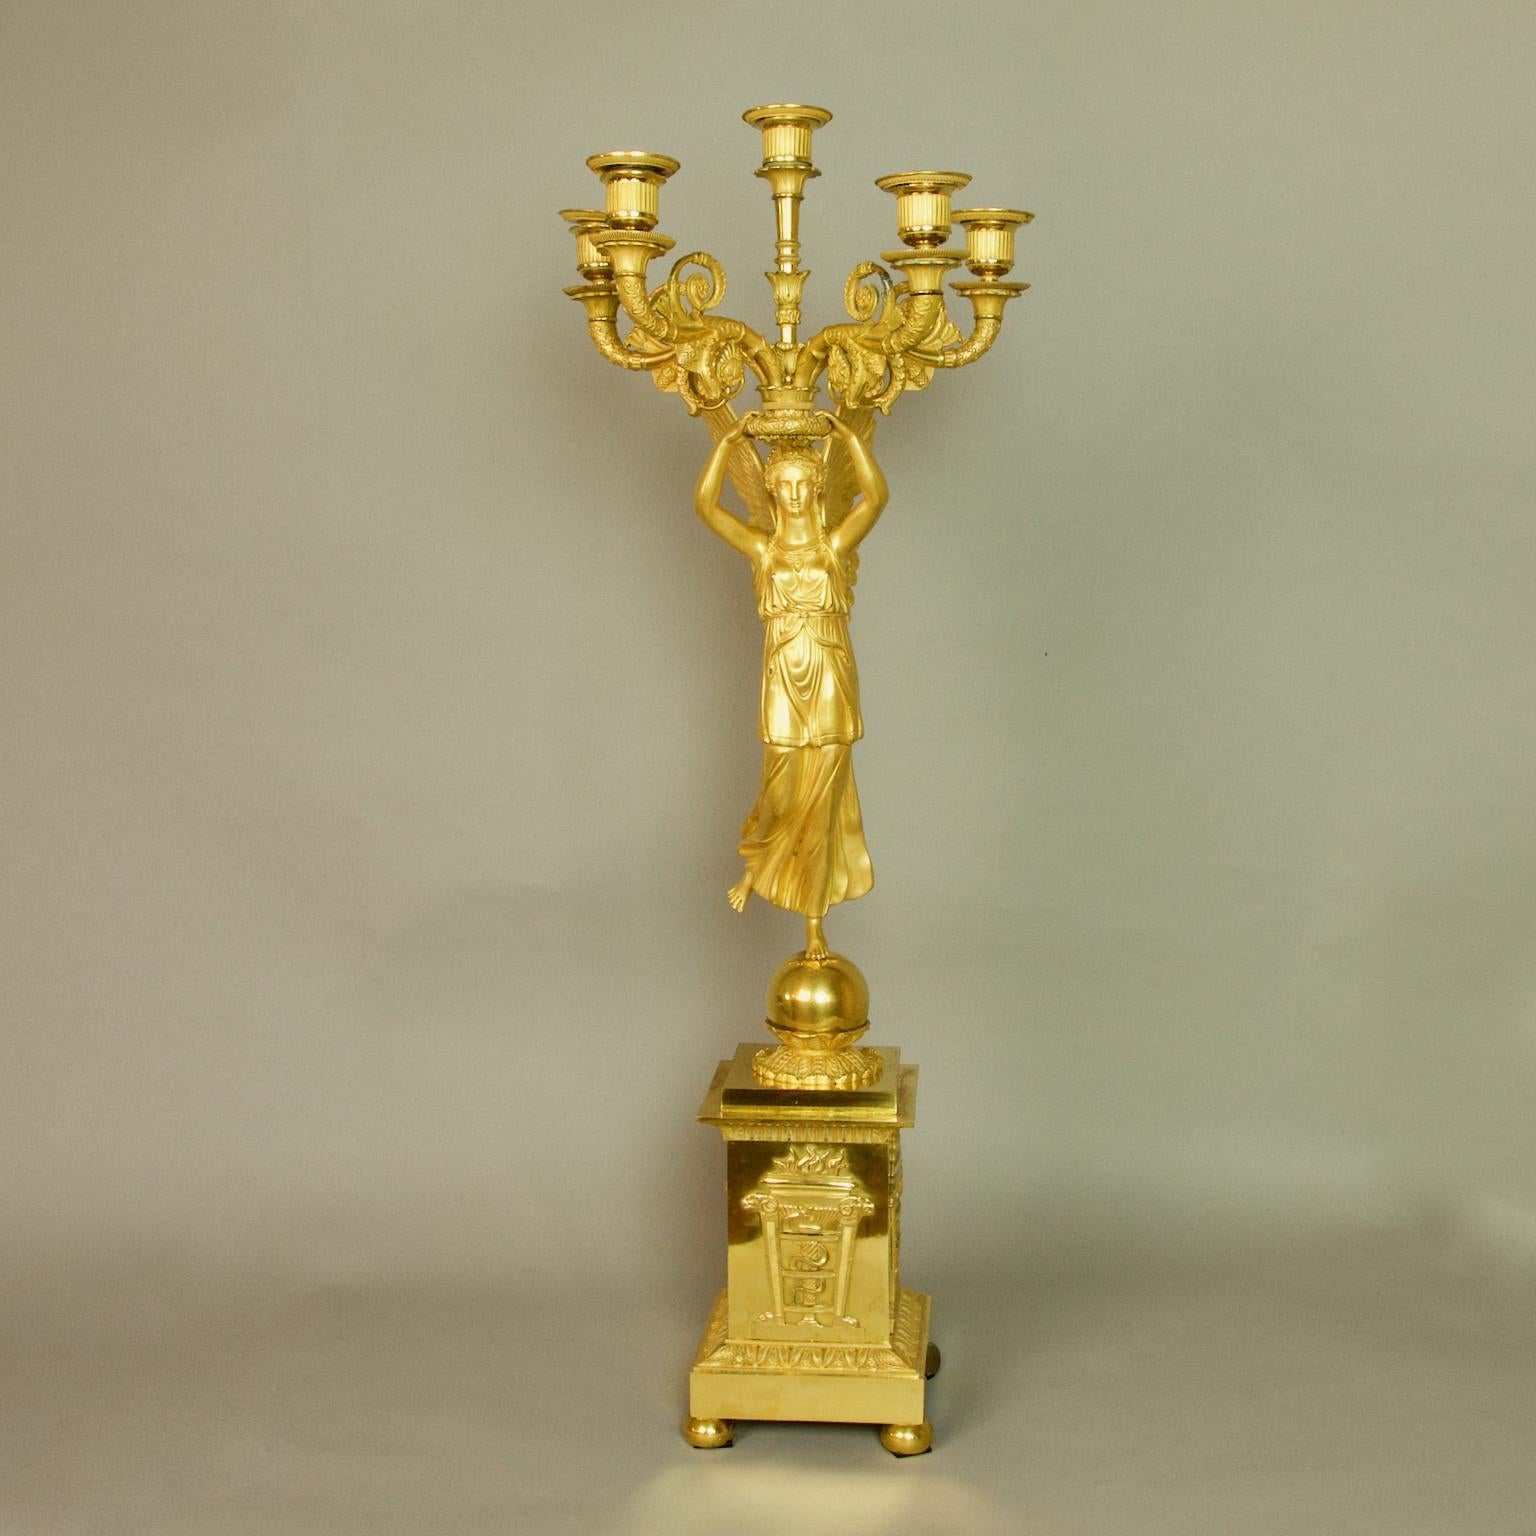 Ormolu Pair of French Empire Gilt Bronze Winged Victory Candelabras, attr. P.P. Thomire